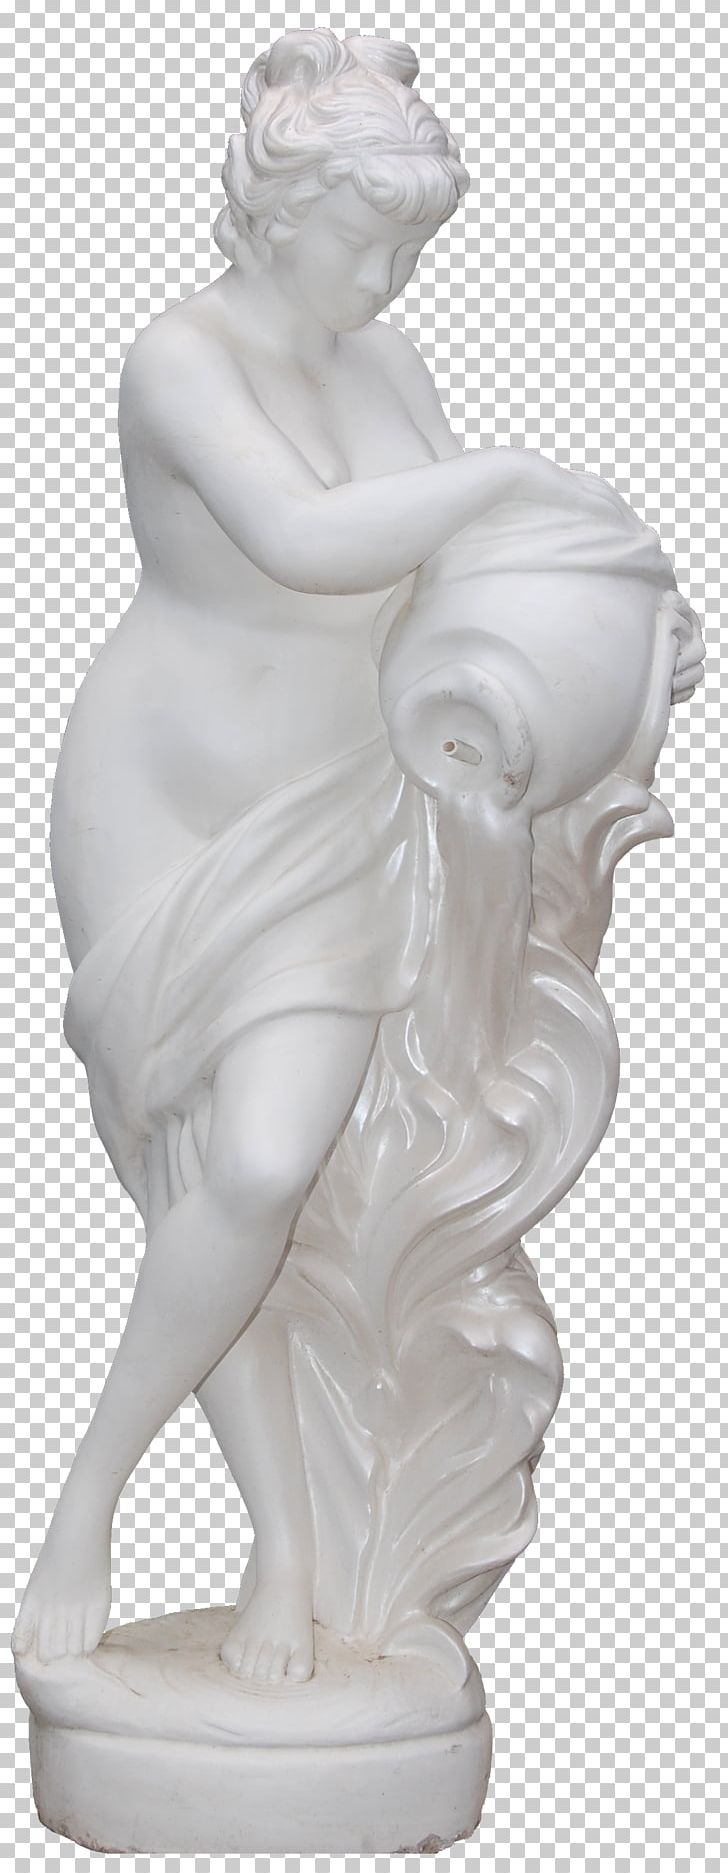 Statue Of Liberty Classical Sculpture Stone Carving PNG, Clipart, Architecture, Artifact, Artwork, Carving, Classical Sculpture Free PNG Download